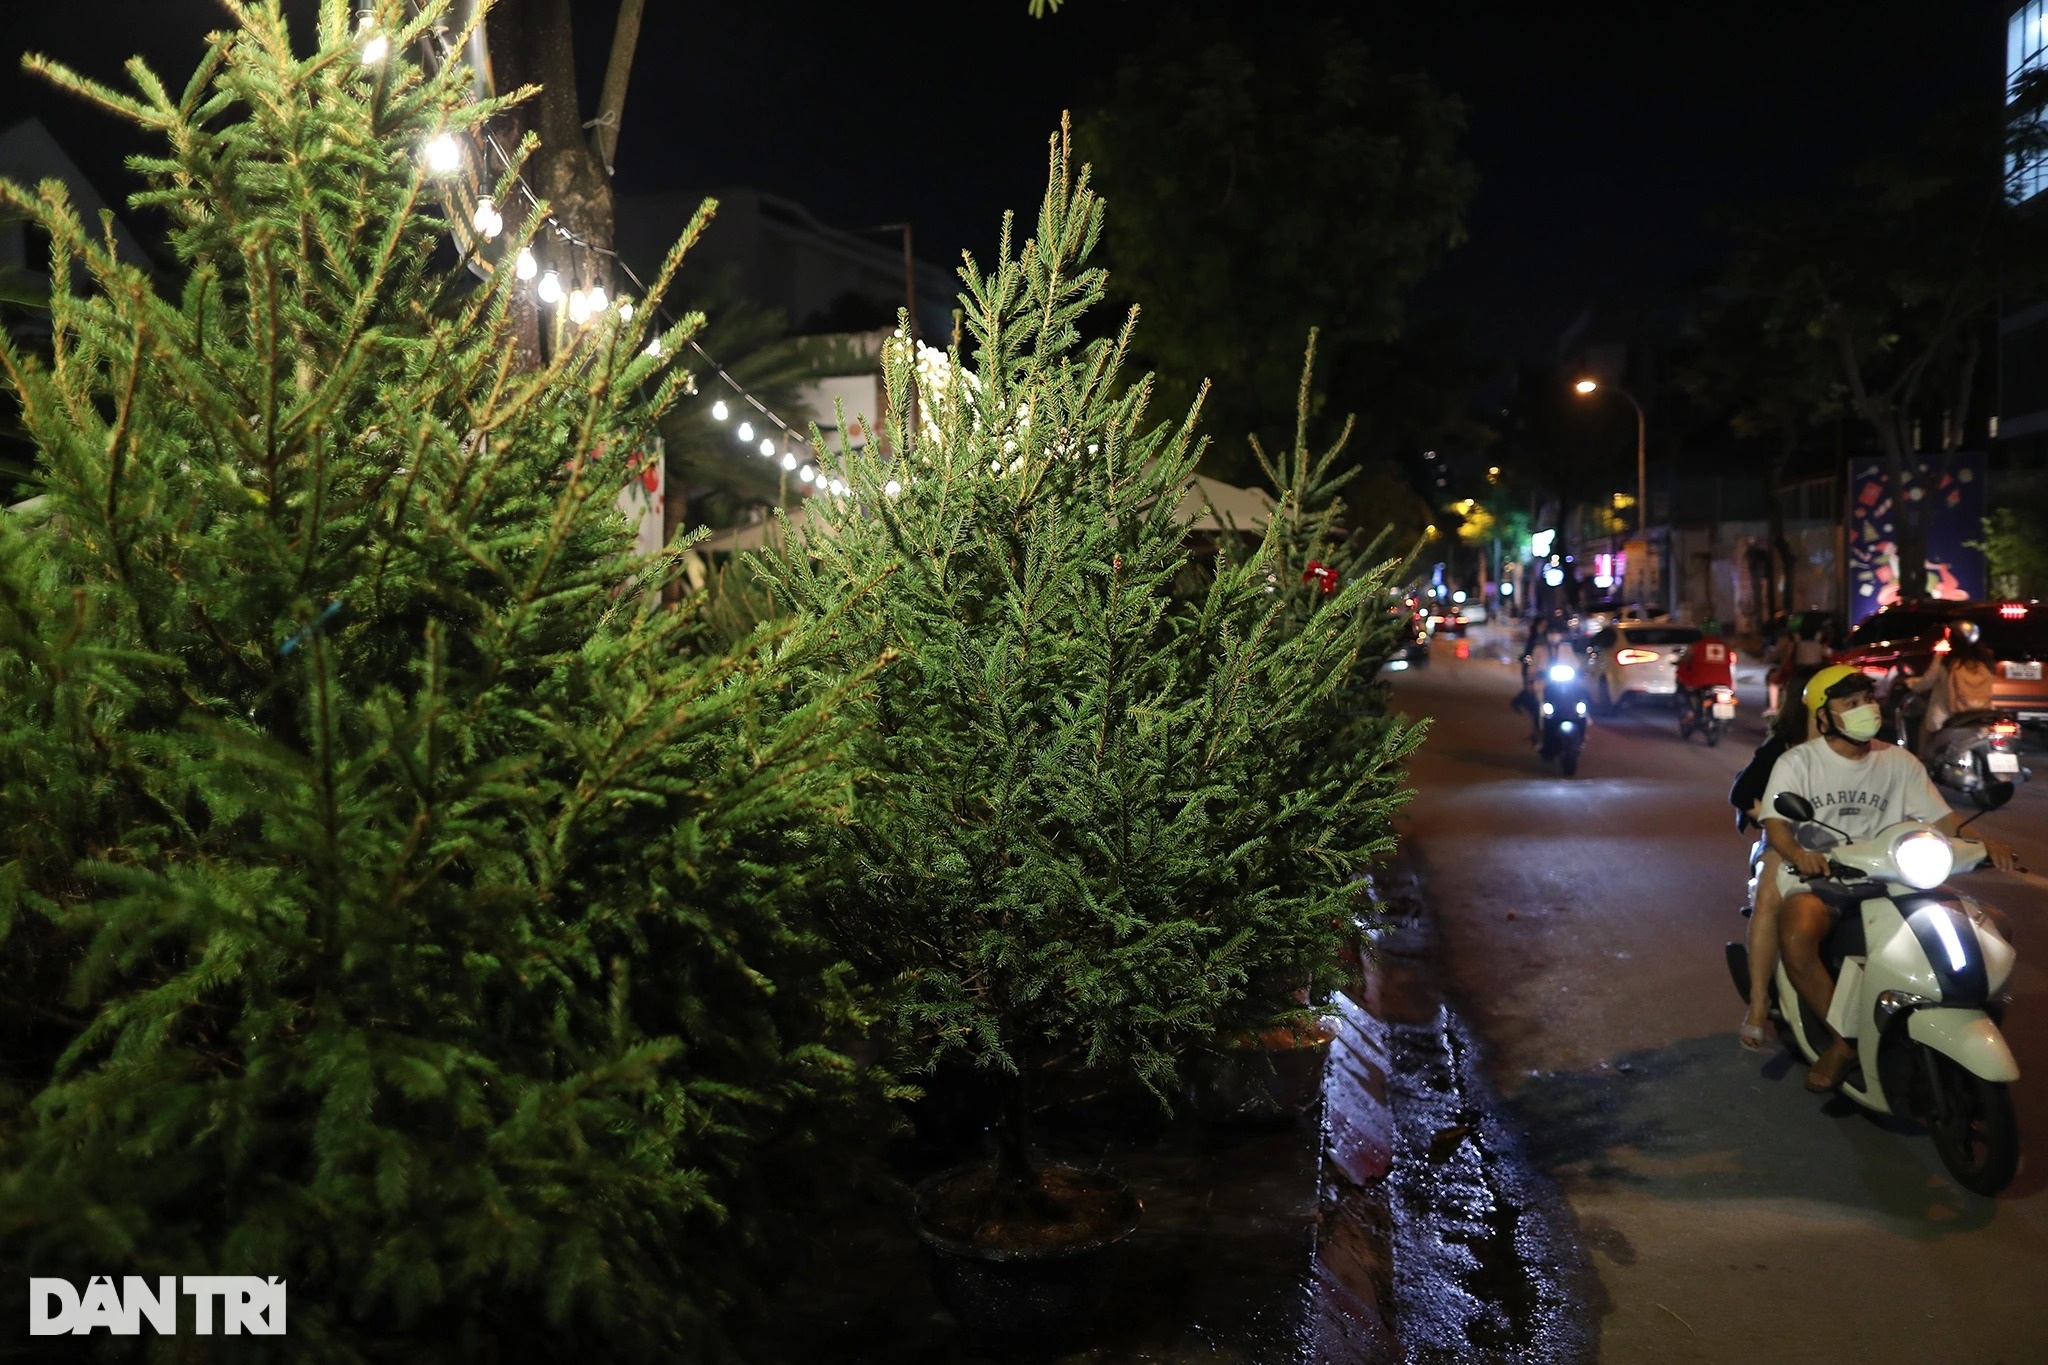 Christmas trees imported from cold European countries are sold all over Saigon's sidewalks - 12